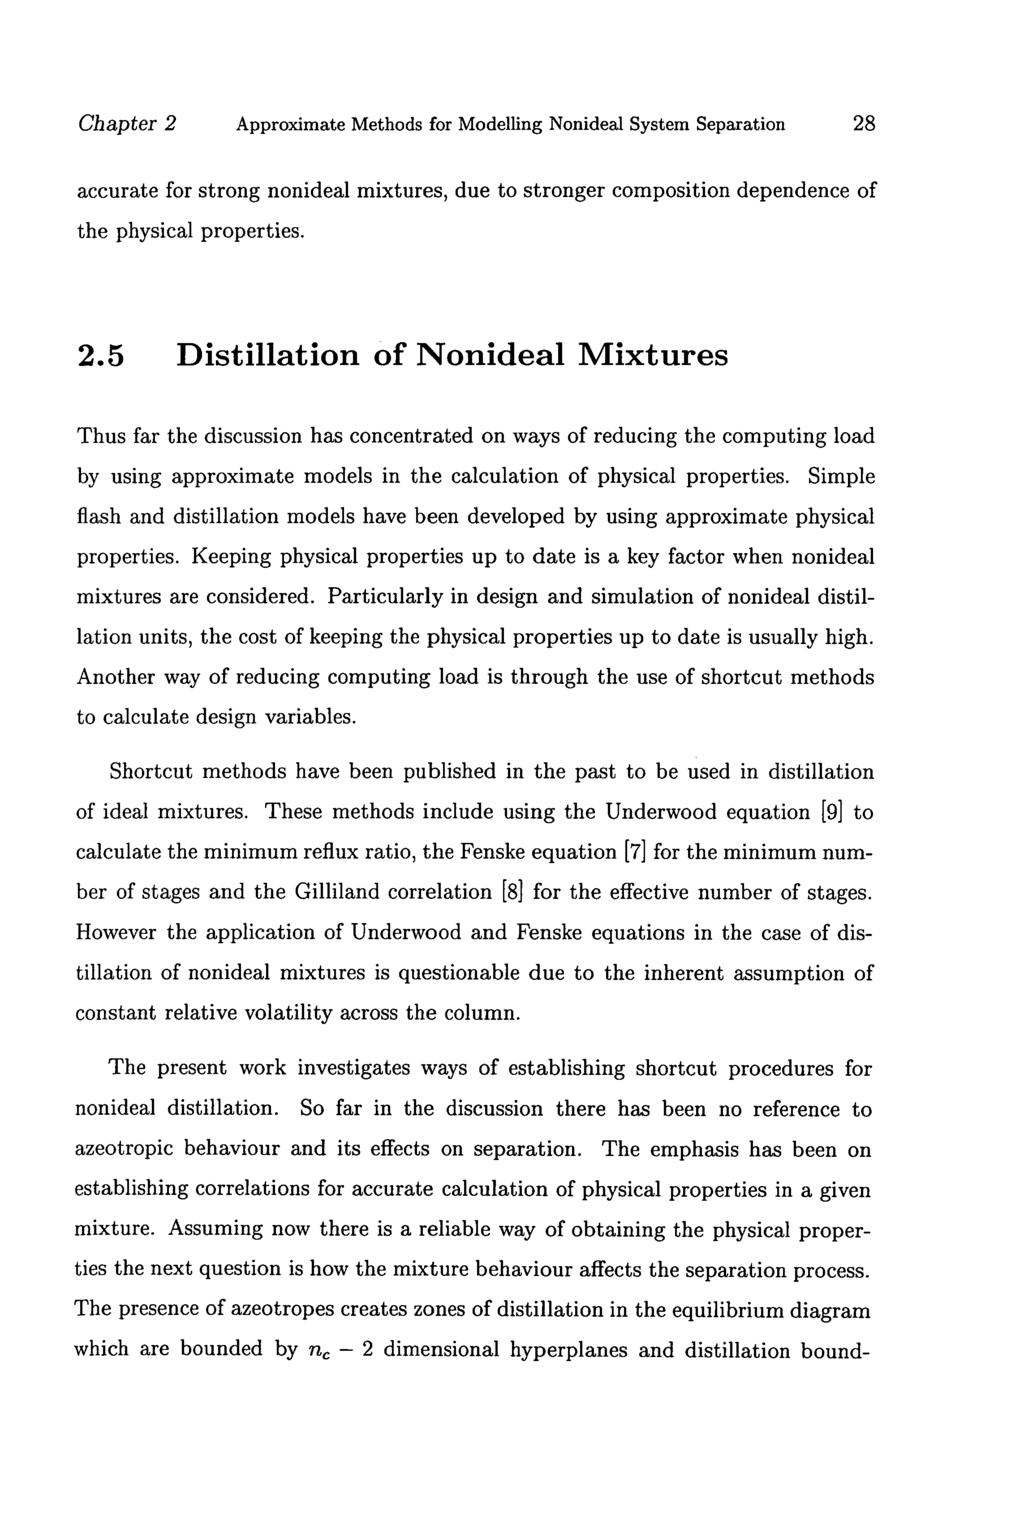 Chapter 2 Approximate Methods for Modelling Nonideal System Separation 28 accurate for strong nonideal mixtures, due to stronger composition dependence of the physical properties. 2.5 Distillation of Nonideal Mixtures Thus far the discussion has concentrated on ways of reducing the computing load by using approximate models in the calculation of physical properties.